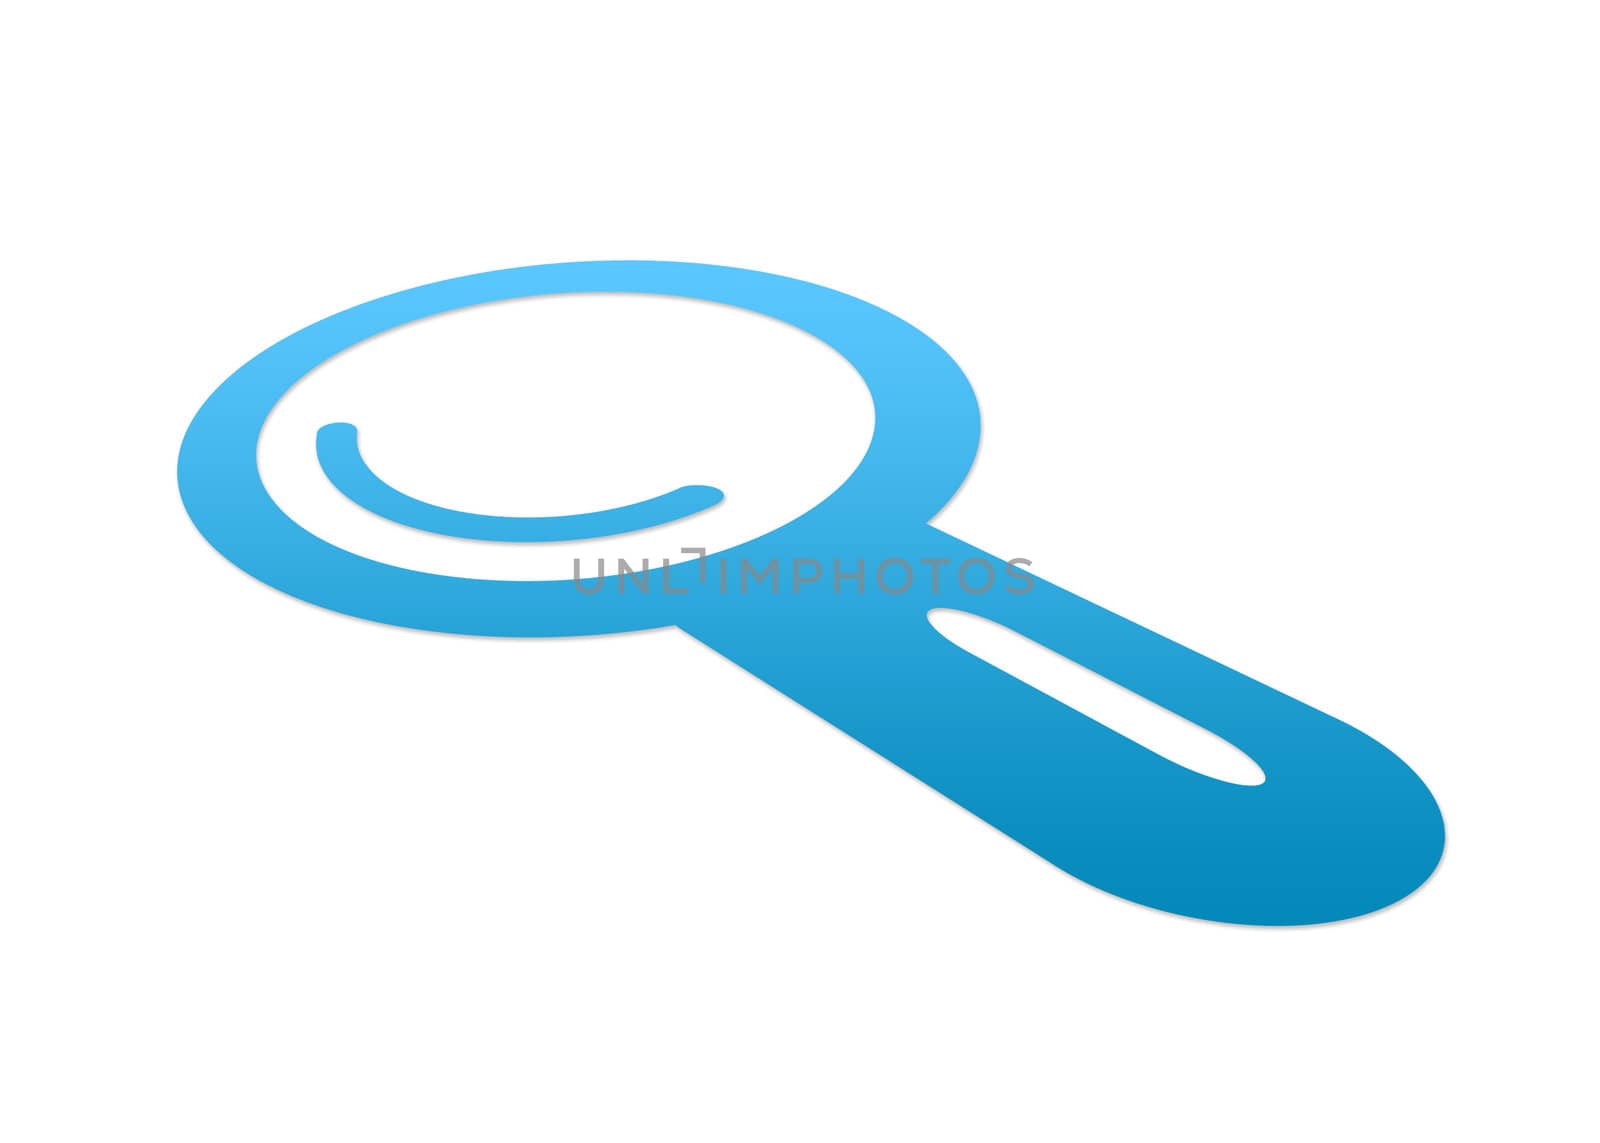 High resolution perspective graphic of a magnifying glass.